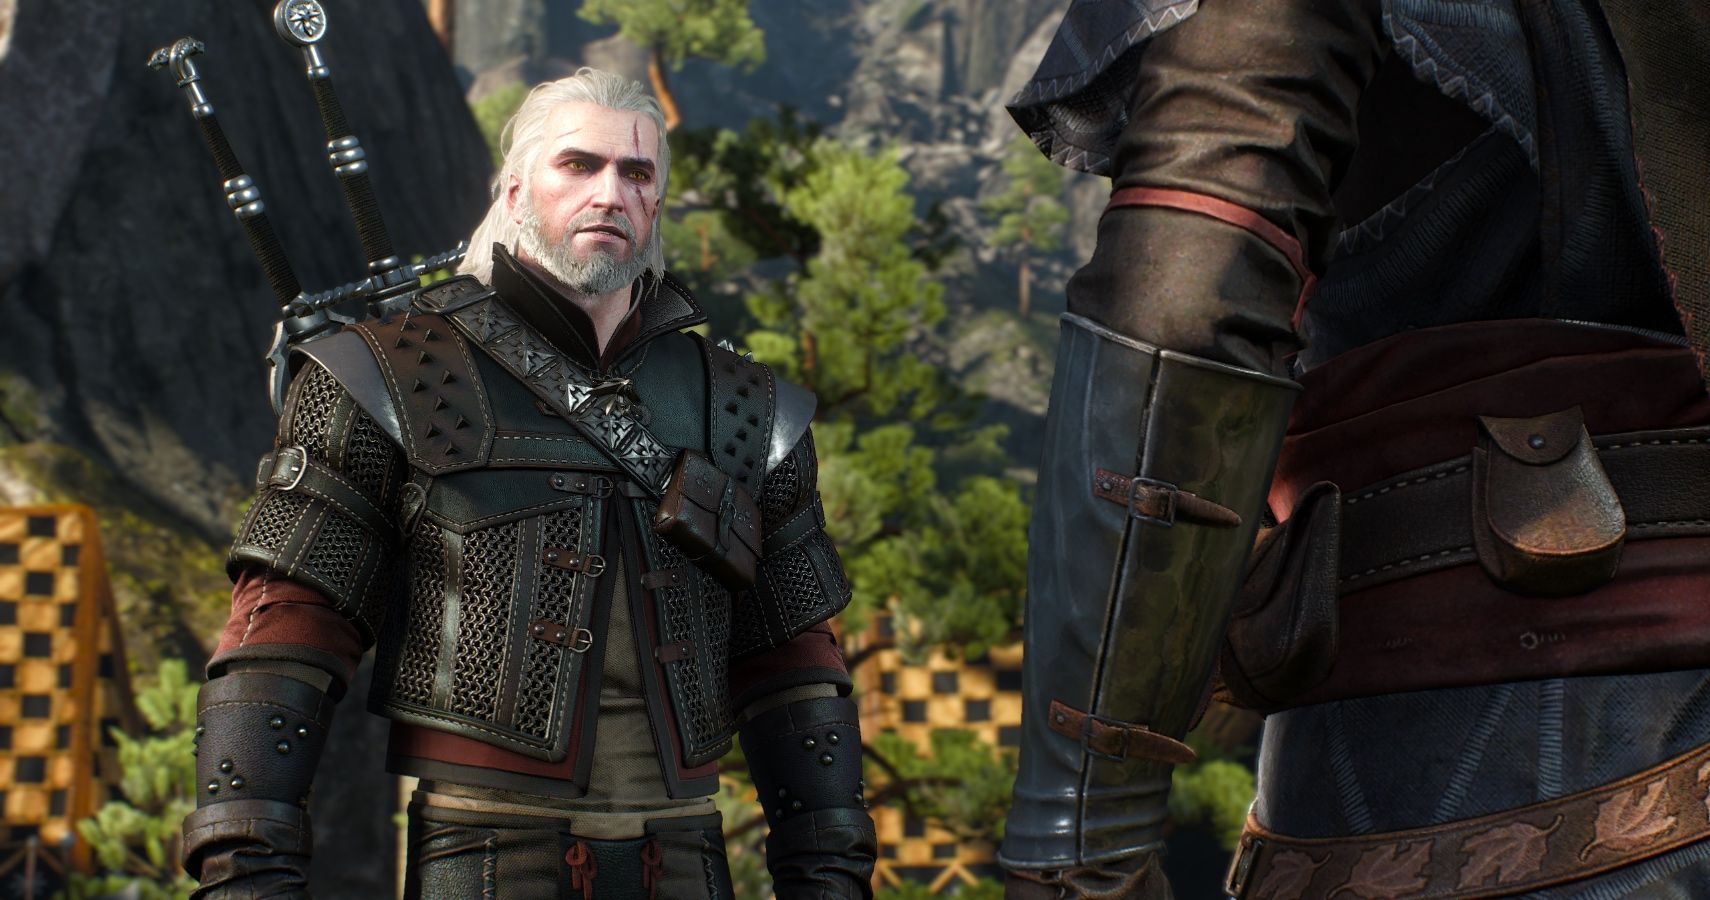 The Witcher 3: The 10 Rarest Armor Sets, Ranked (& How To Find Them)
